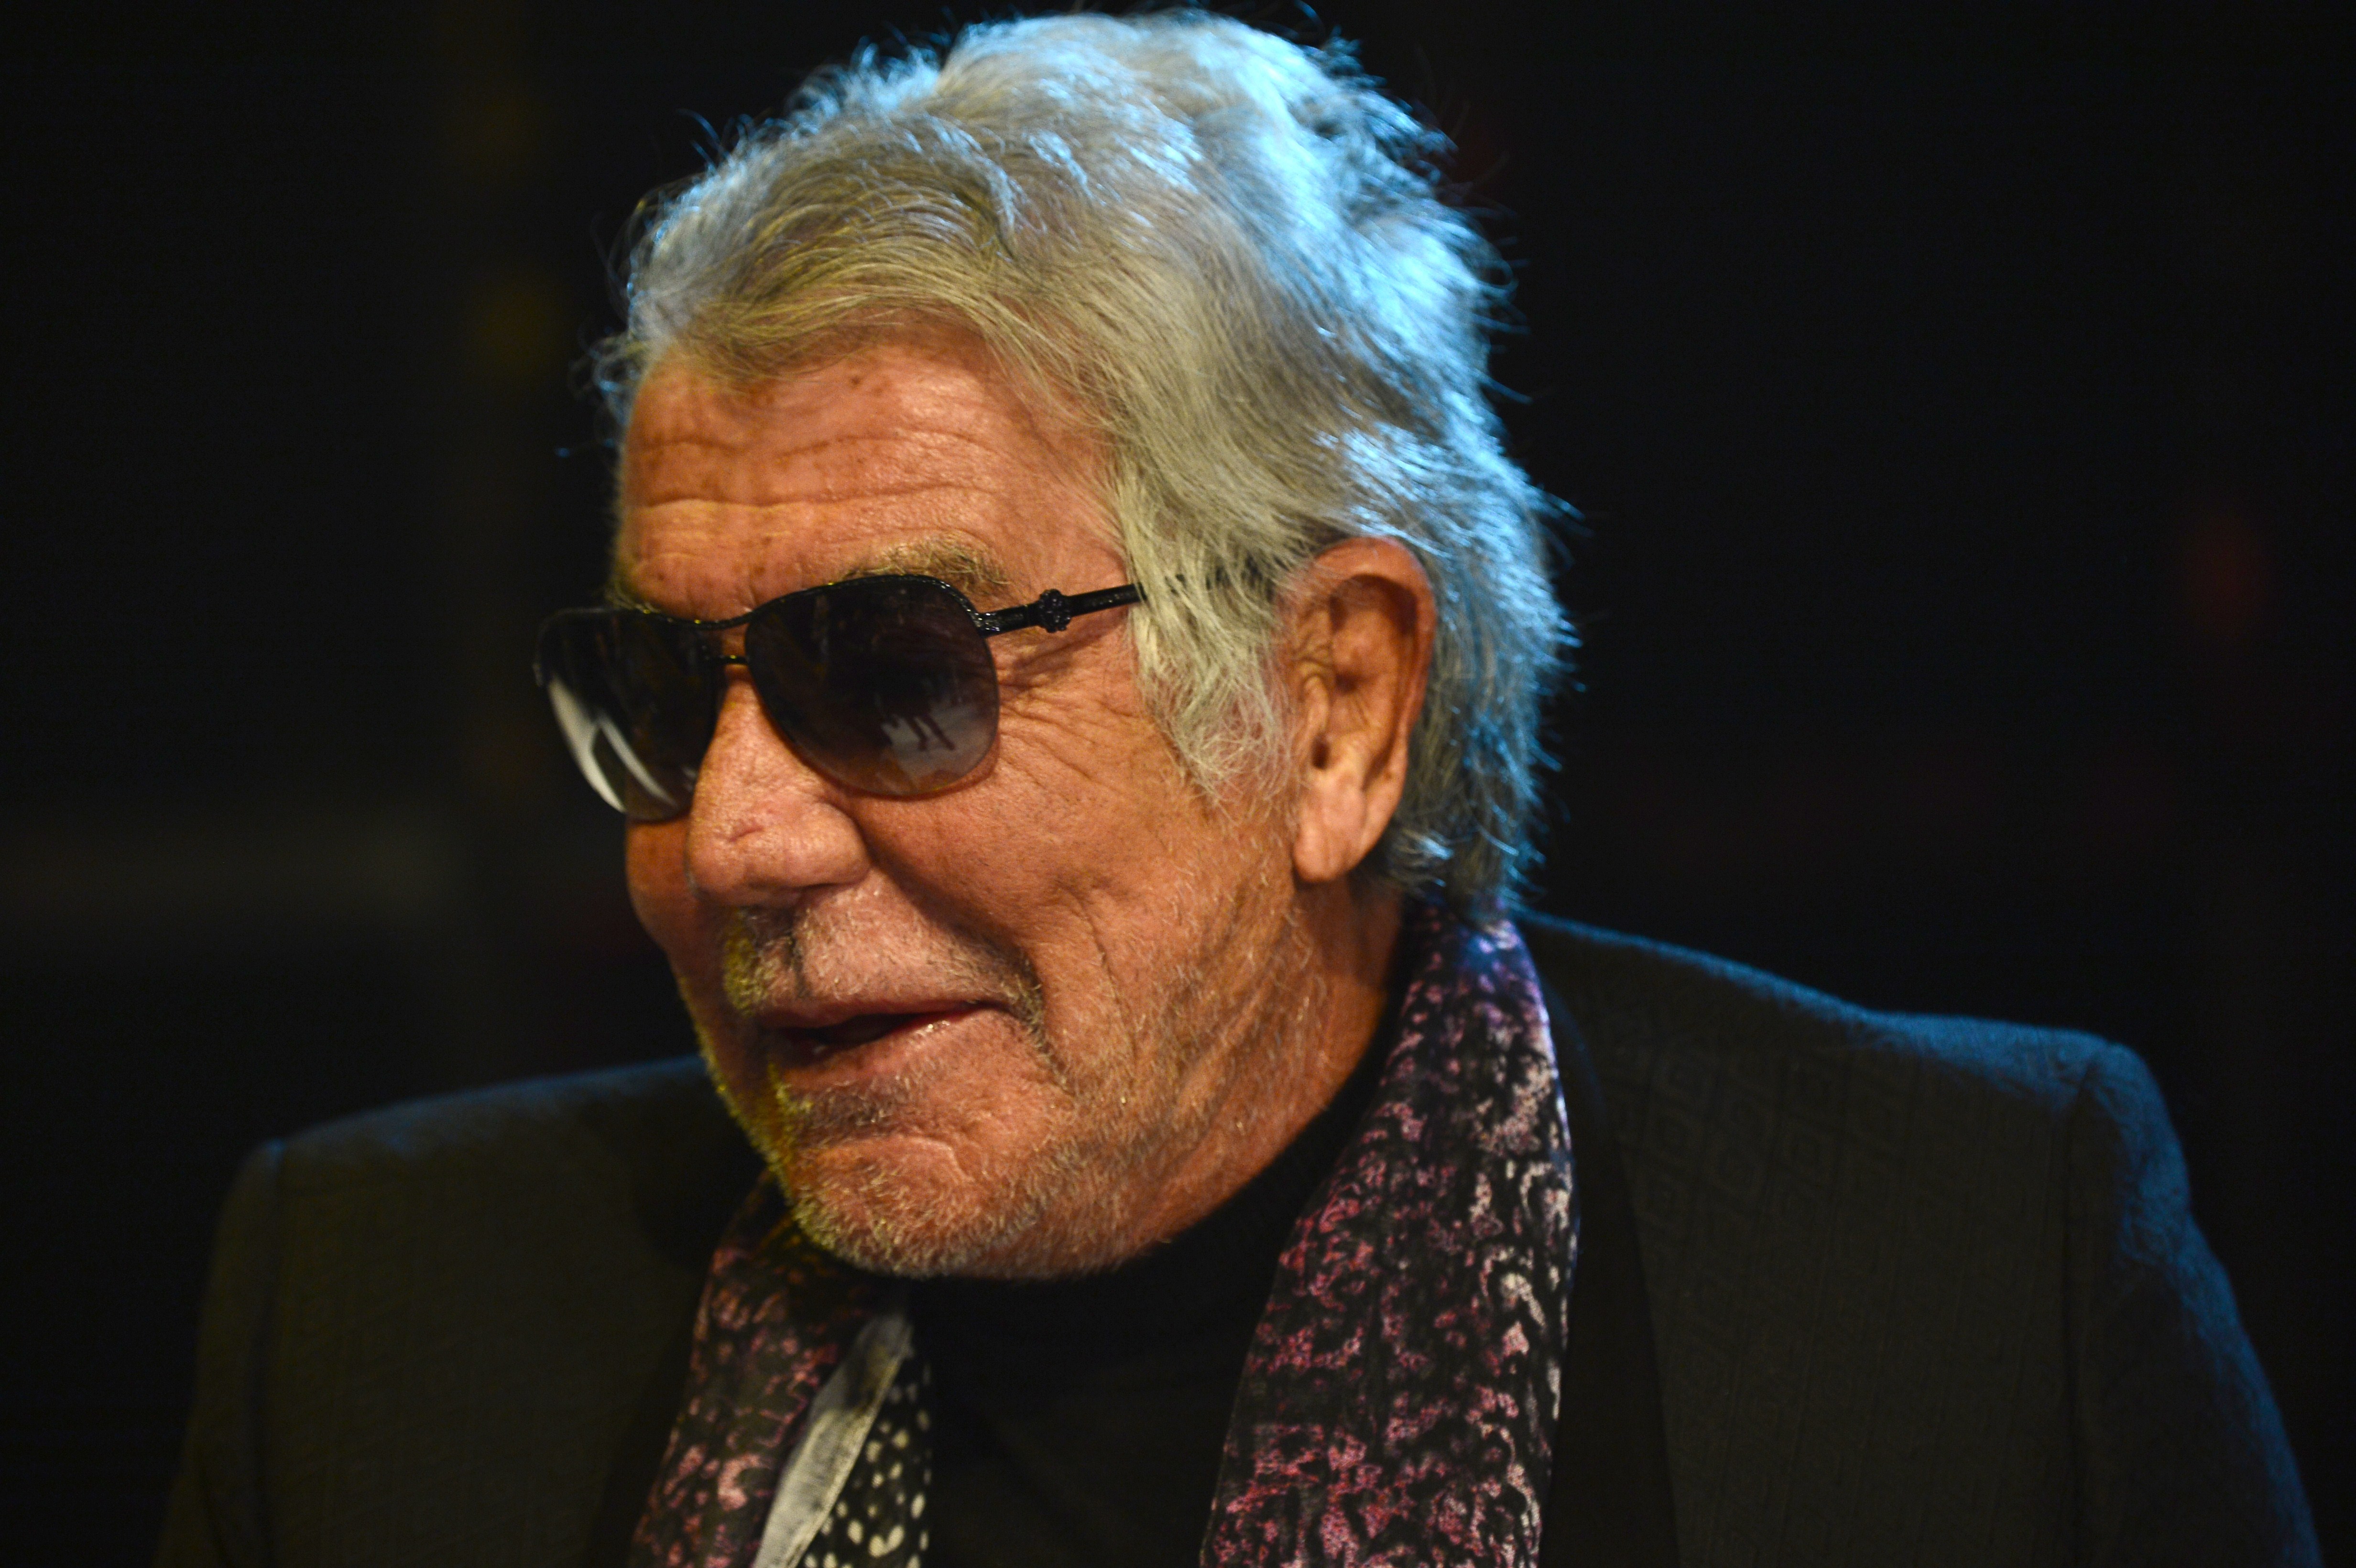 Roberto Cavalli Is Being Sued By Graffiti Artists Over Copyright ...